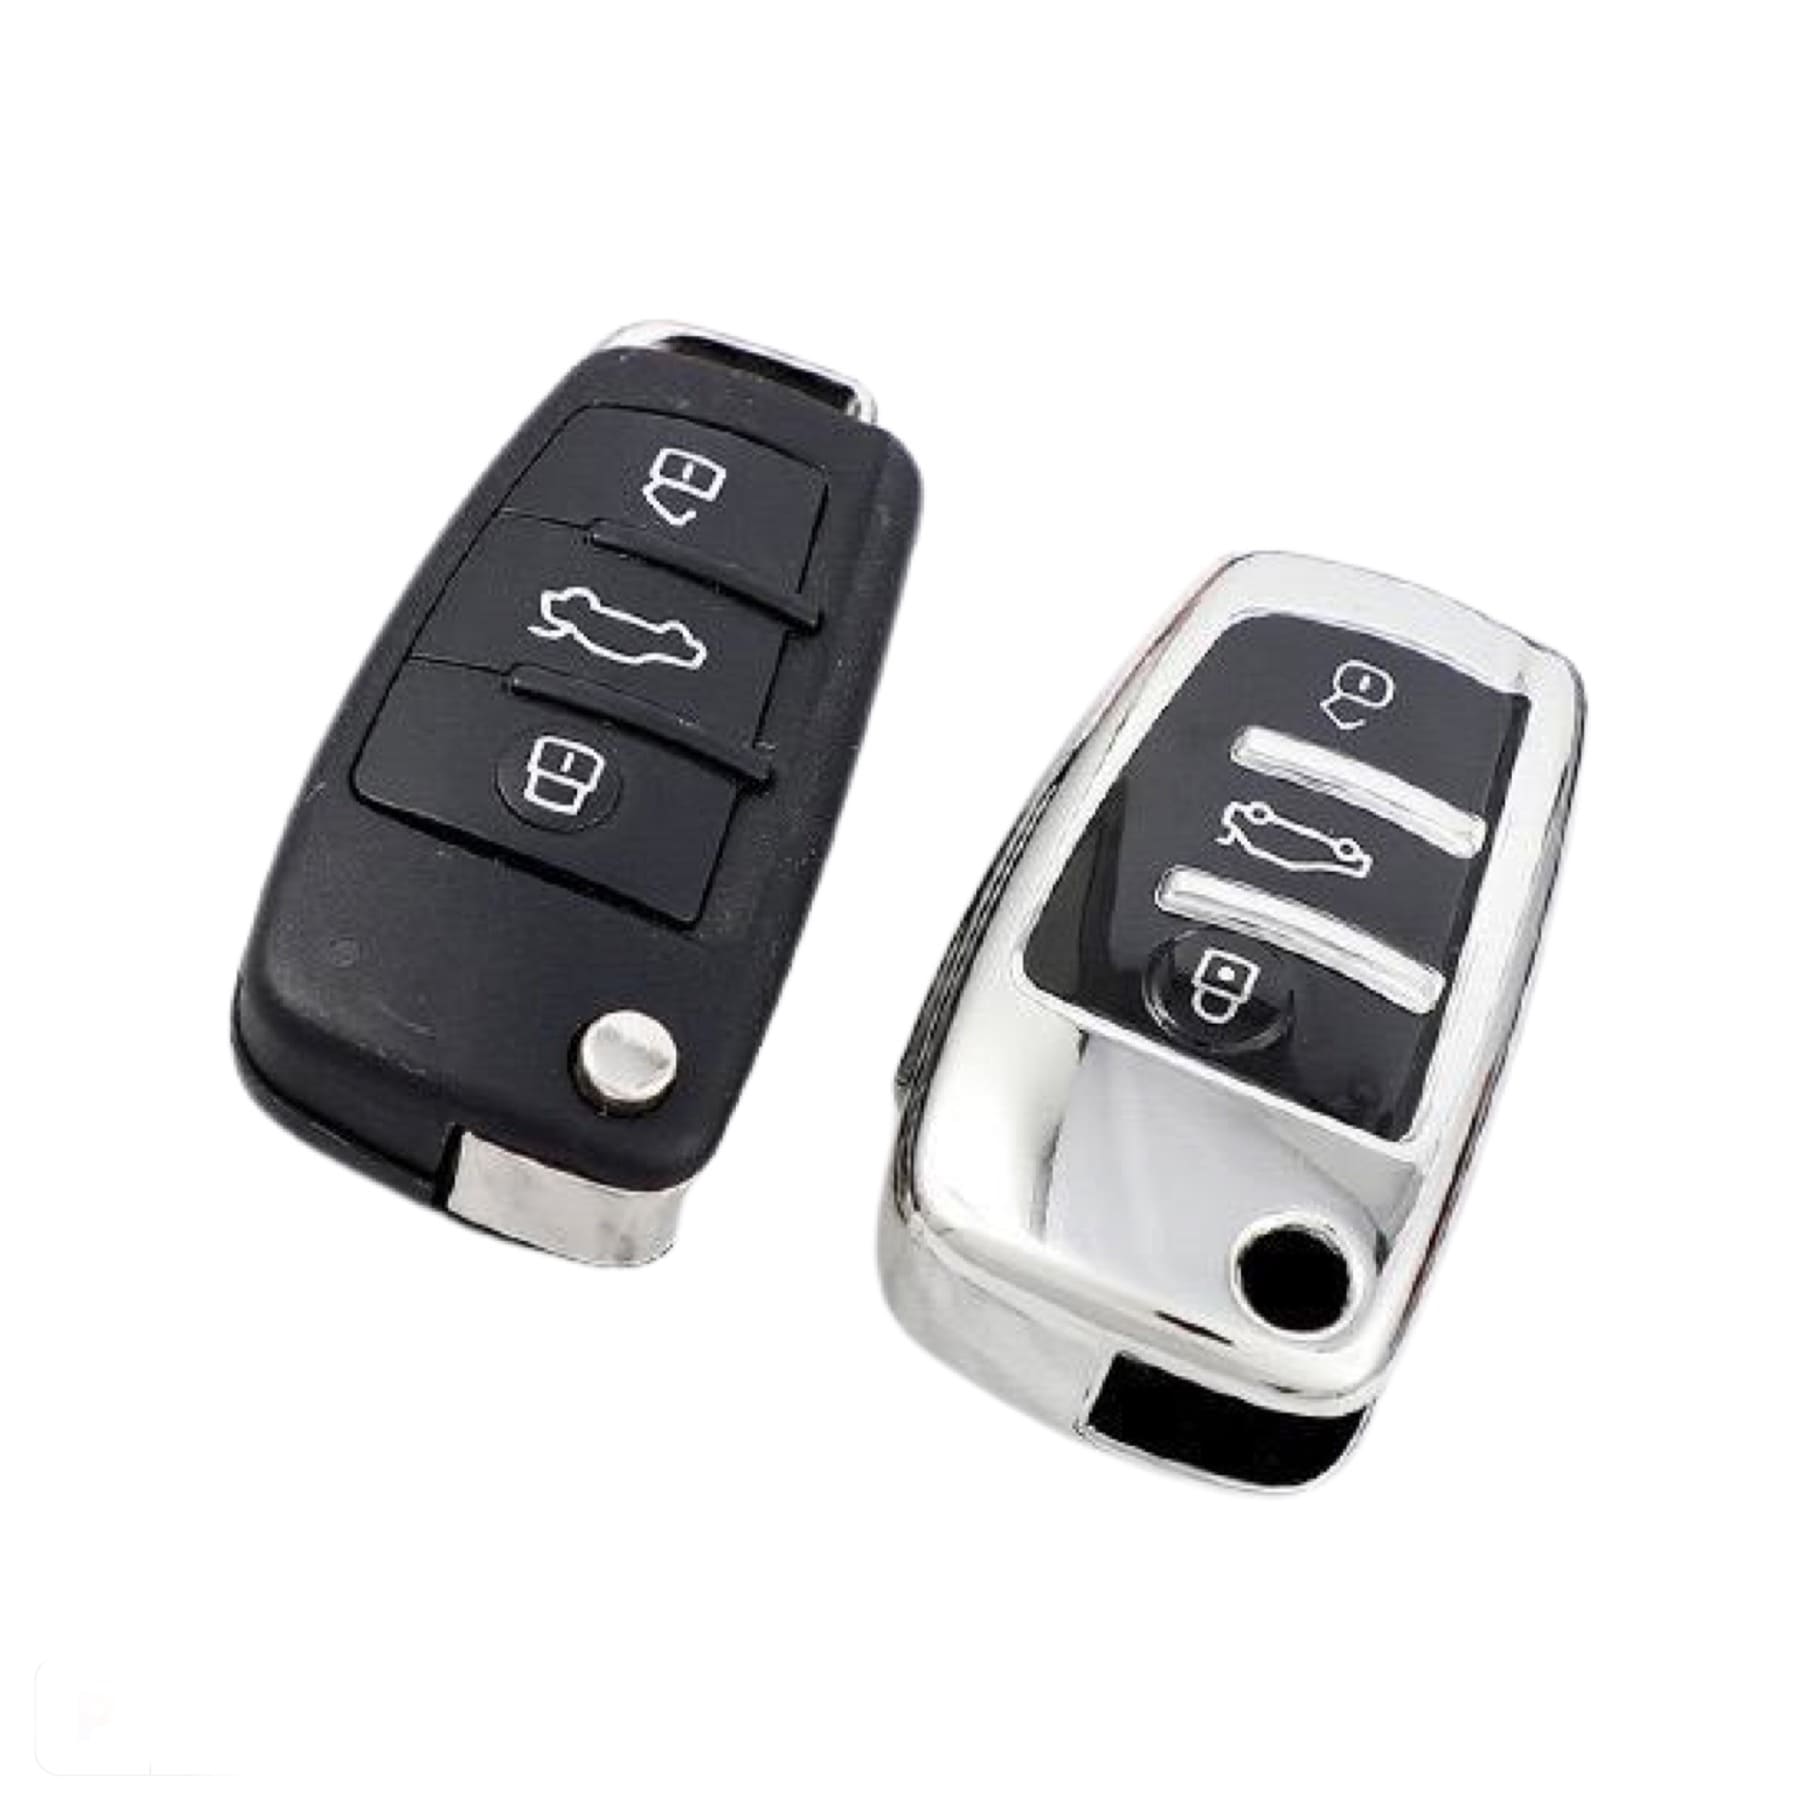 Audi key fob cover  Audi A1, A3, A6, Q2, Q3, Q7, TT, TTS, R8, S3, S6, RS3,  RS6 key cover-keysleeves